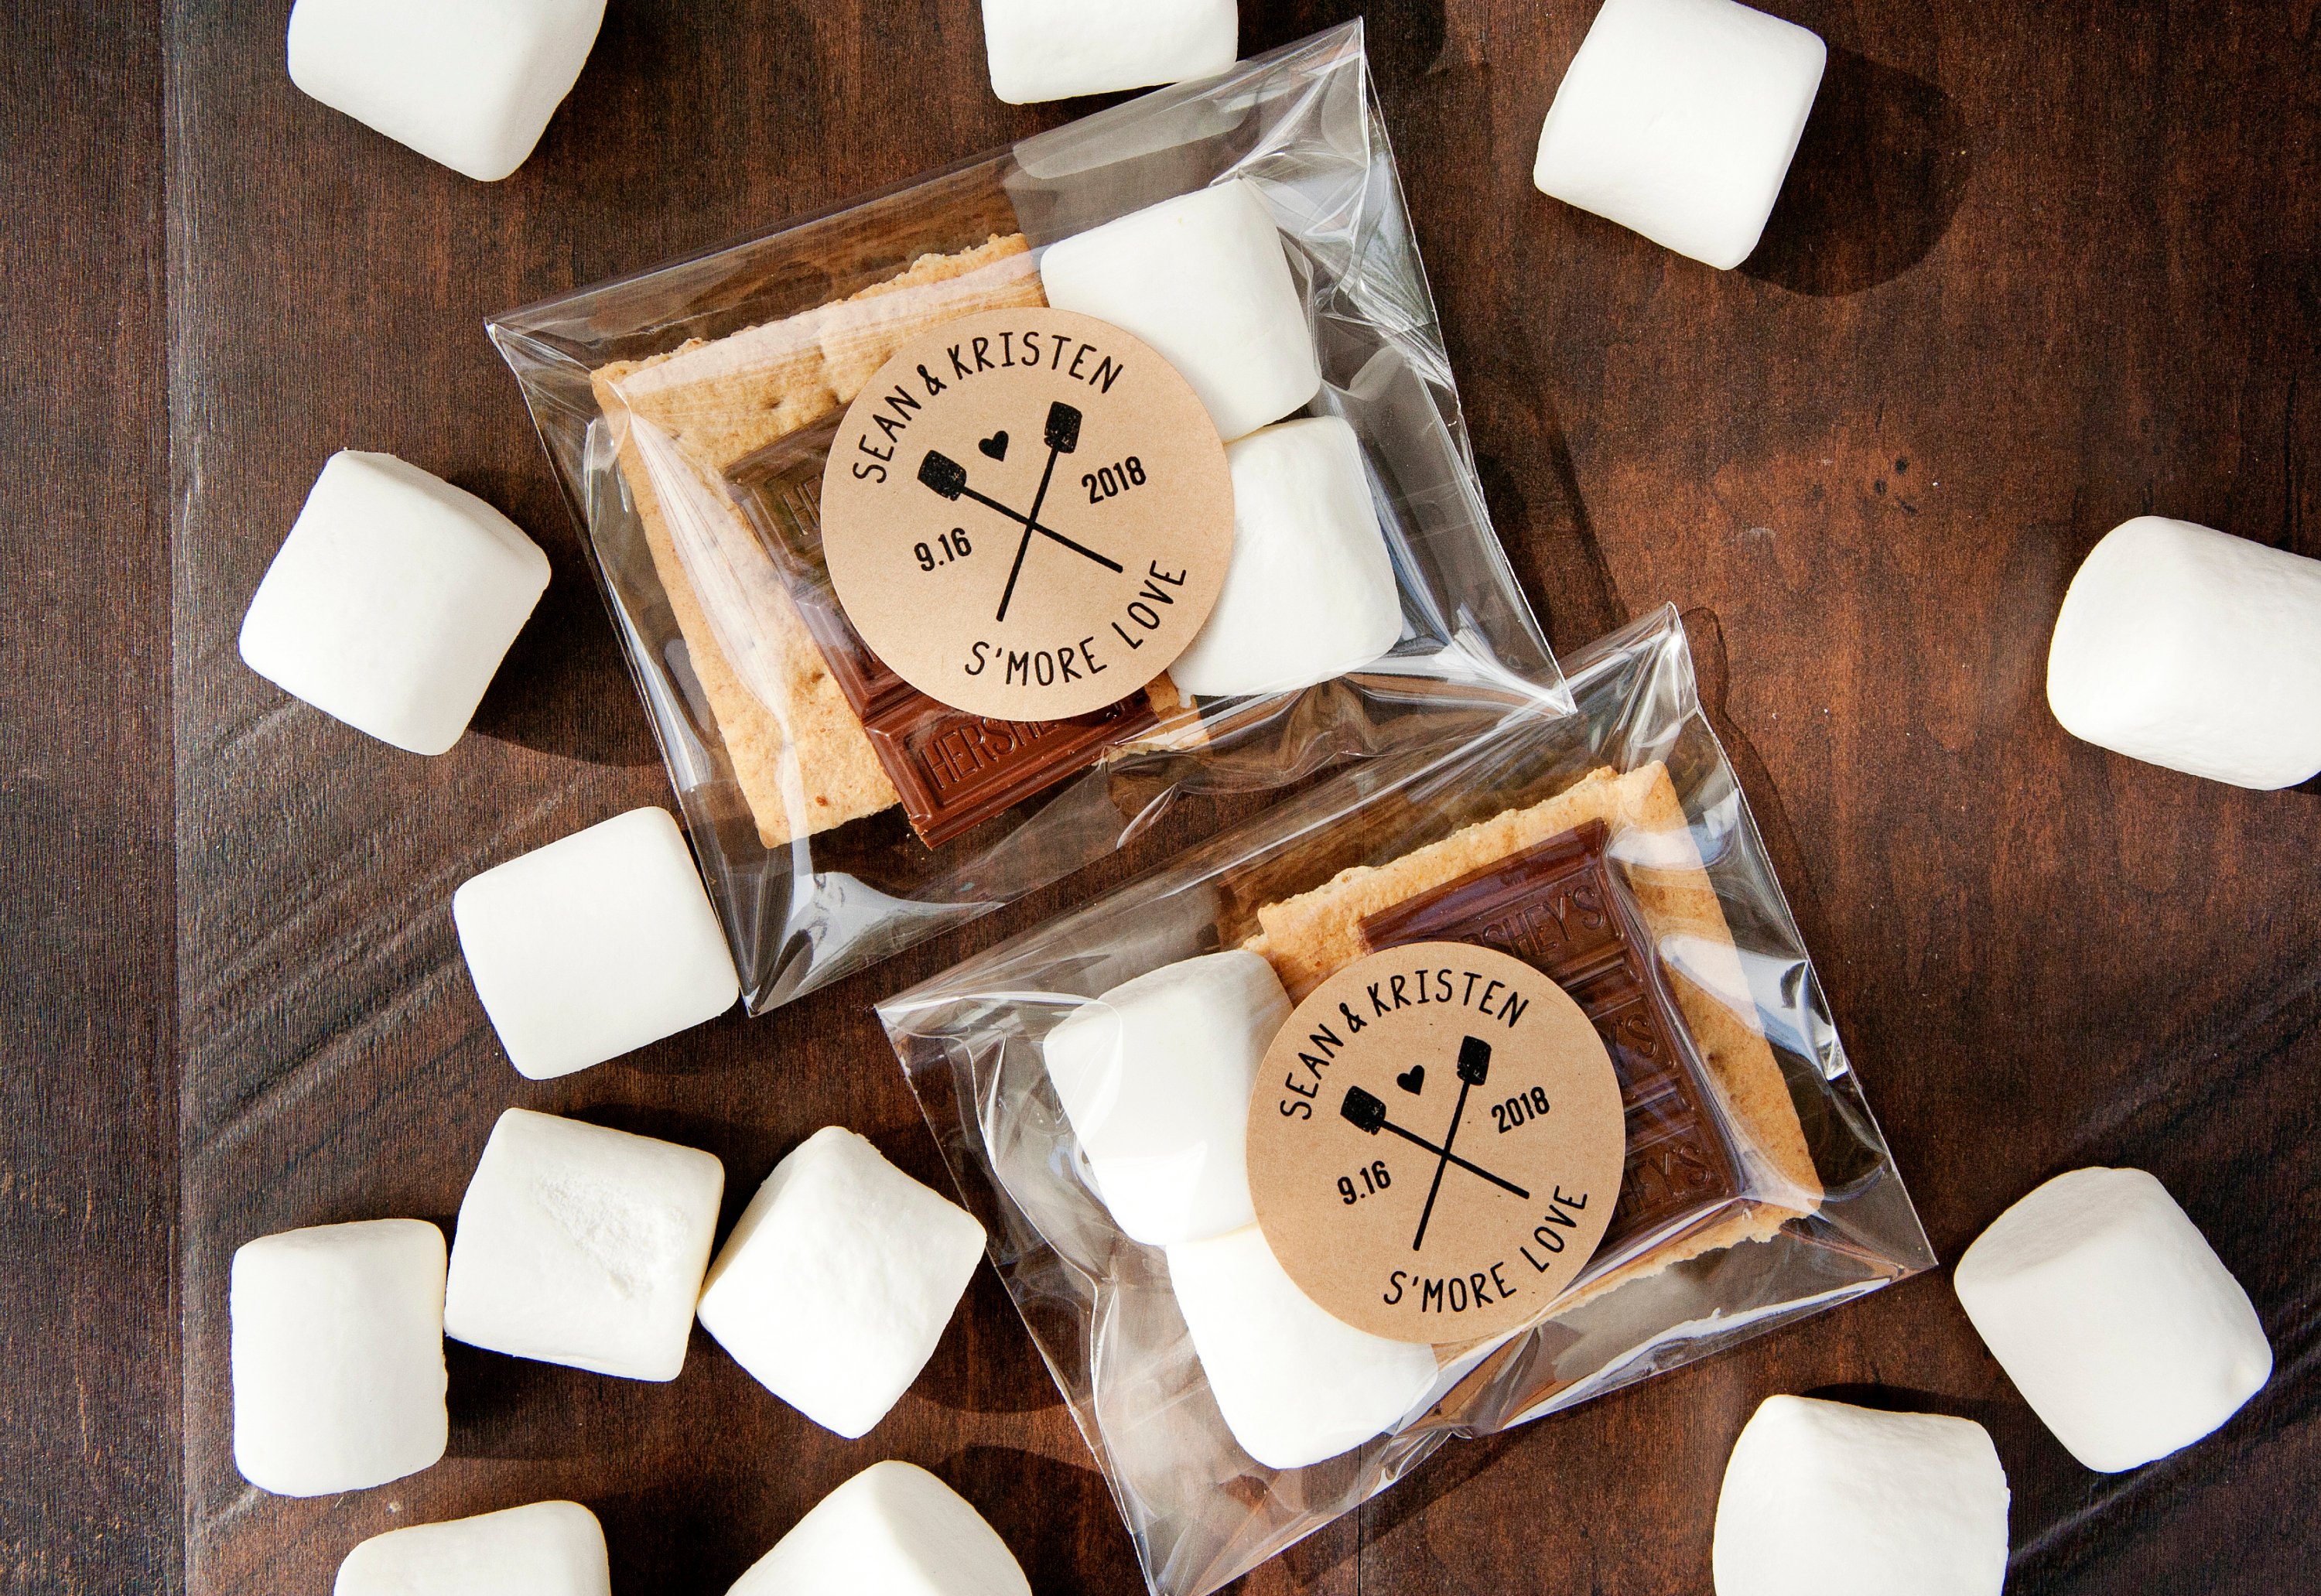 Party Favor Individually Wrapped Graham Crackers Mailers Birthday Party Favors S'mores Graduation Favors Bridal Shower Favors